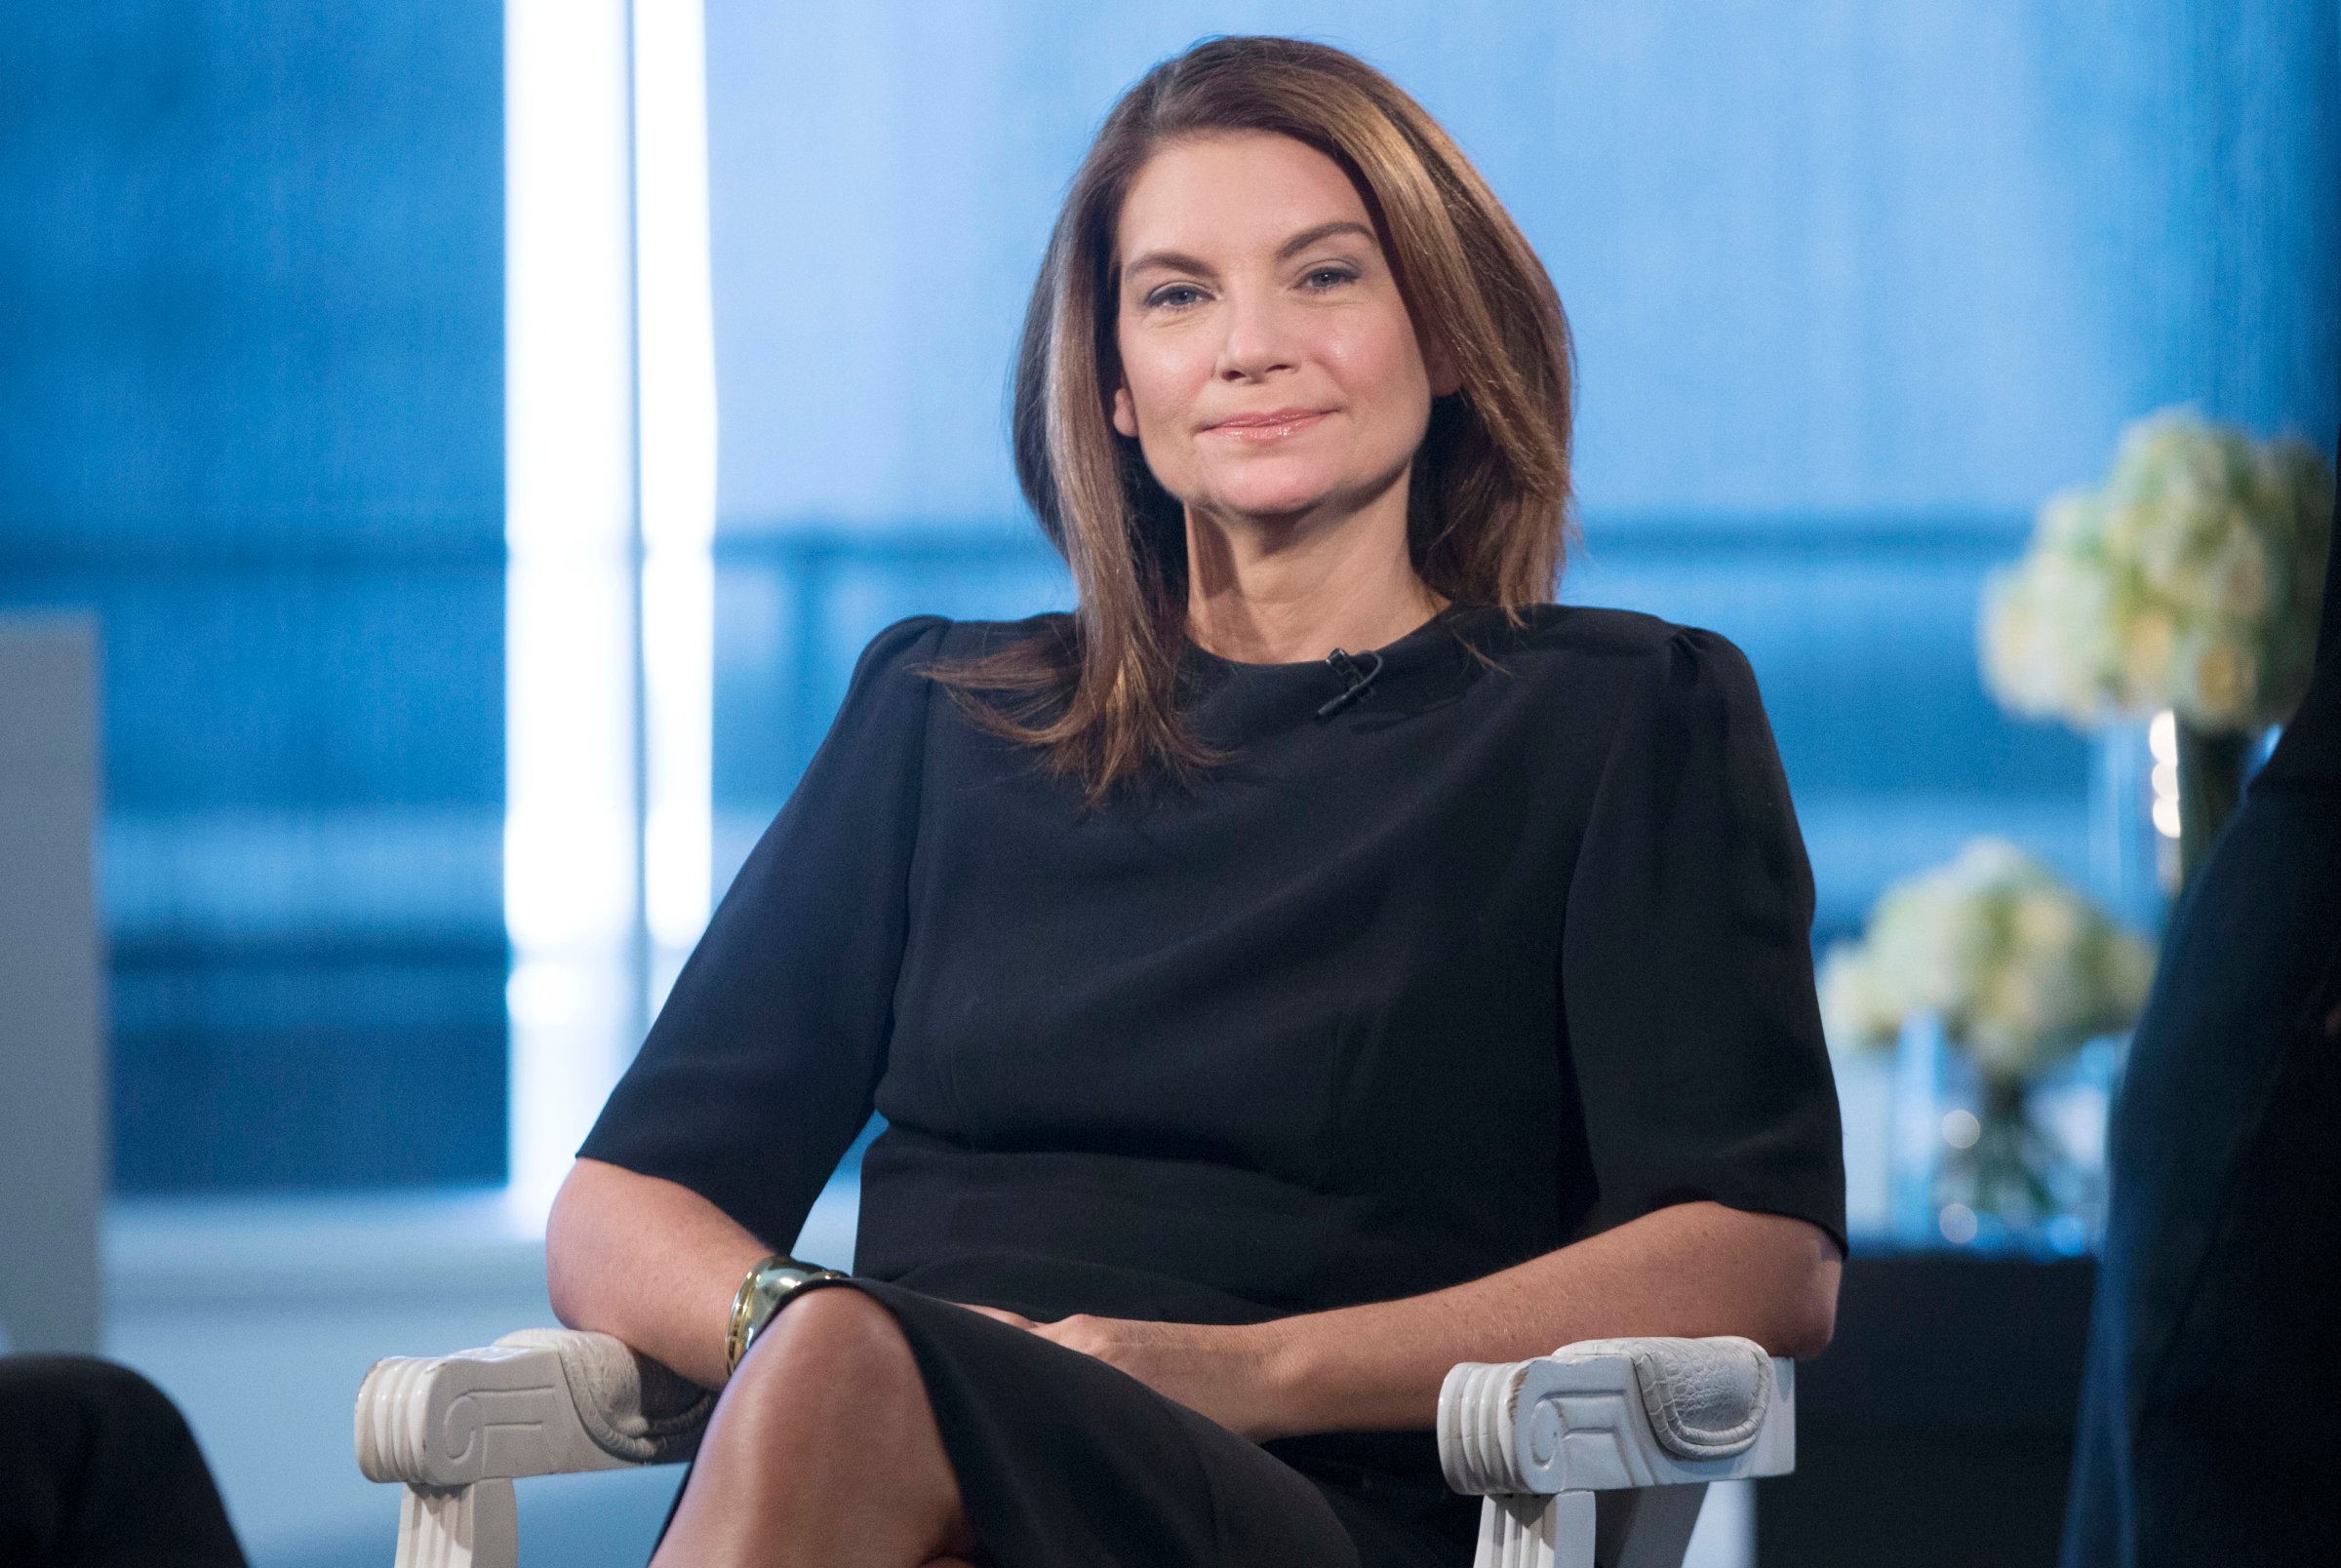 Natalie Massenet, founder and chairman of Net-A-Porter Ltd, pauses during an interview at the company's head office in London on June 18, 2015.